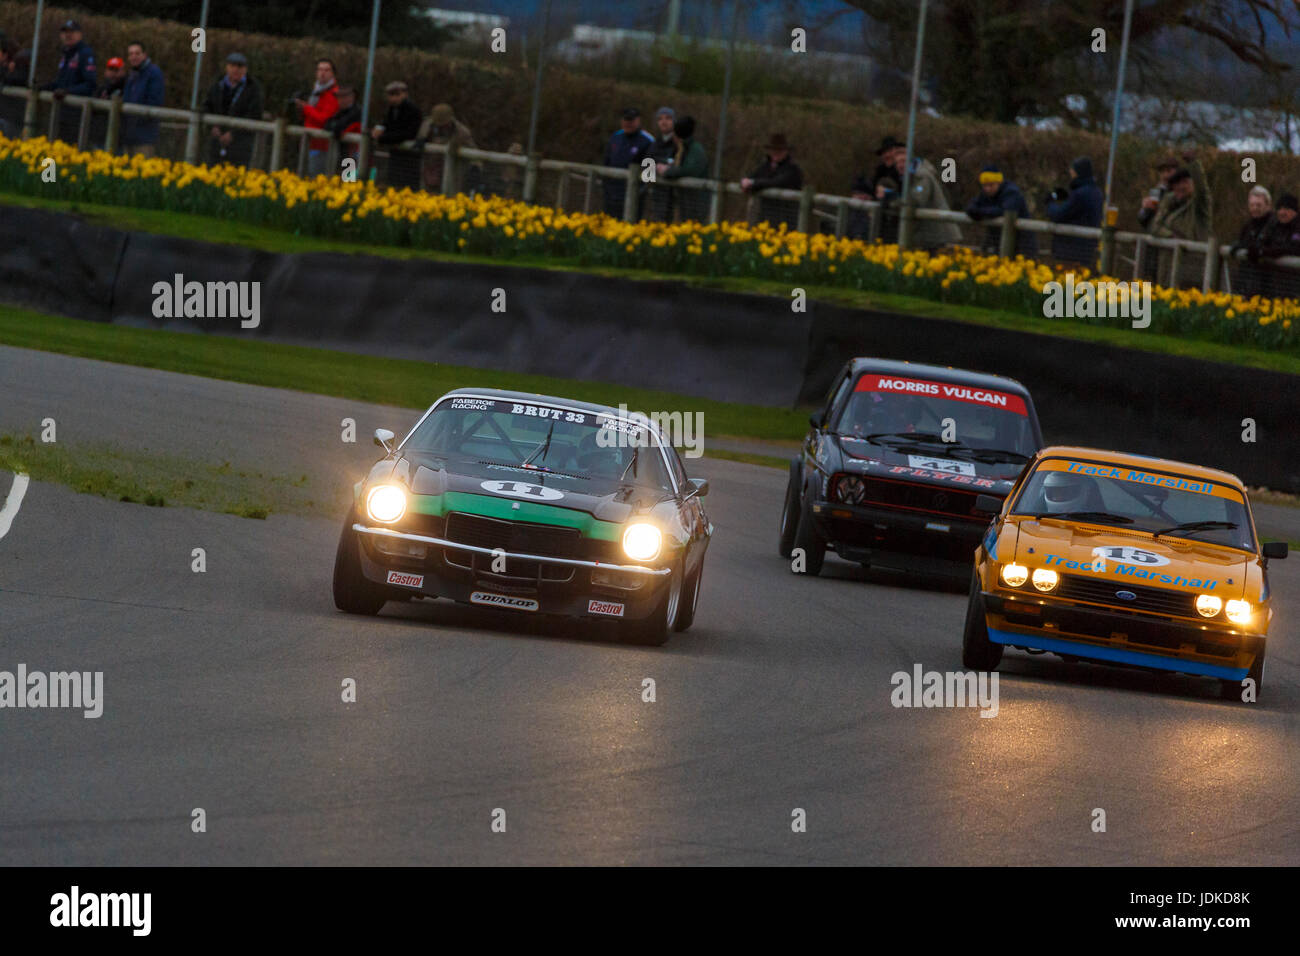 Chevrolet Camera Z28, Ford Capri 3.0s and Volkswagon Golf GTi battle it out during the Gerry Marshall Sprint at Goodwood GRRC 75th Members Meeting, UK Stock Photo